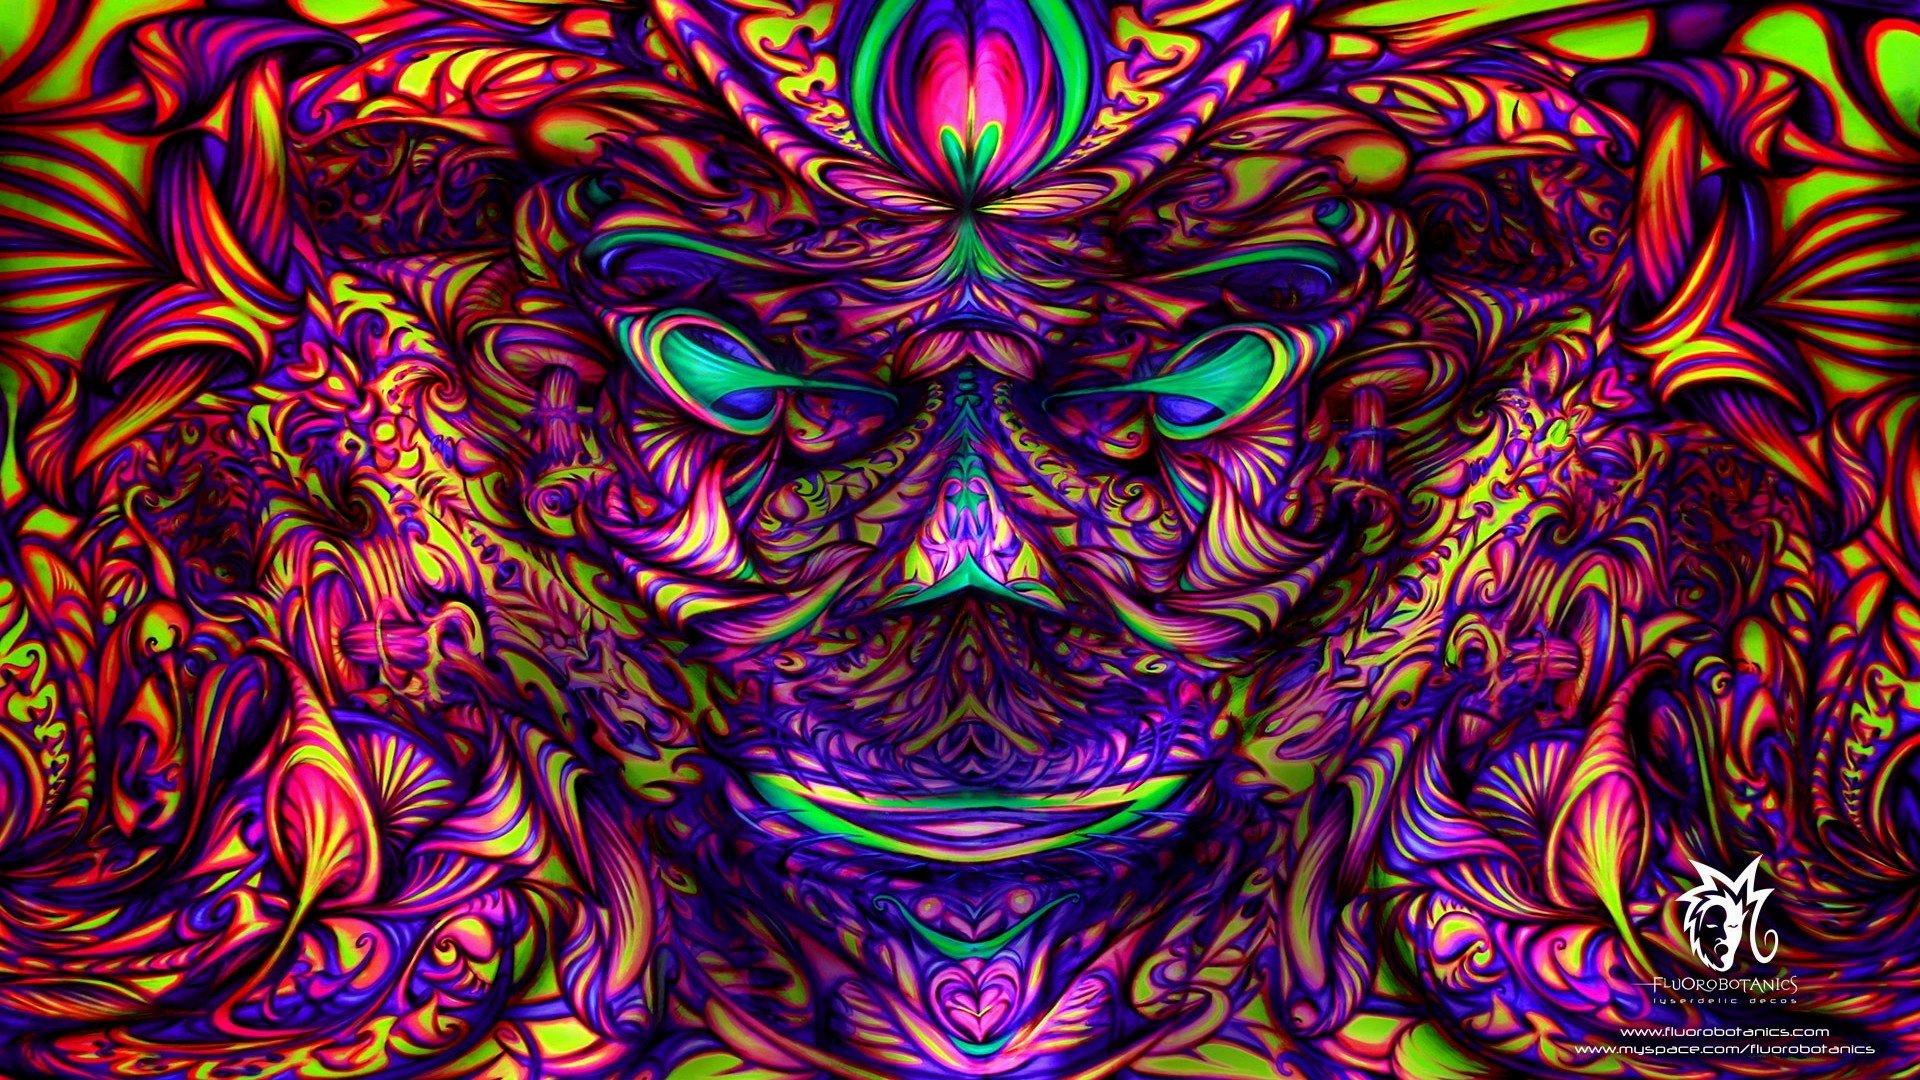 Colorful Trippy Wallpaper Designs for Computer